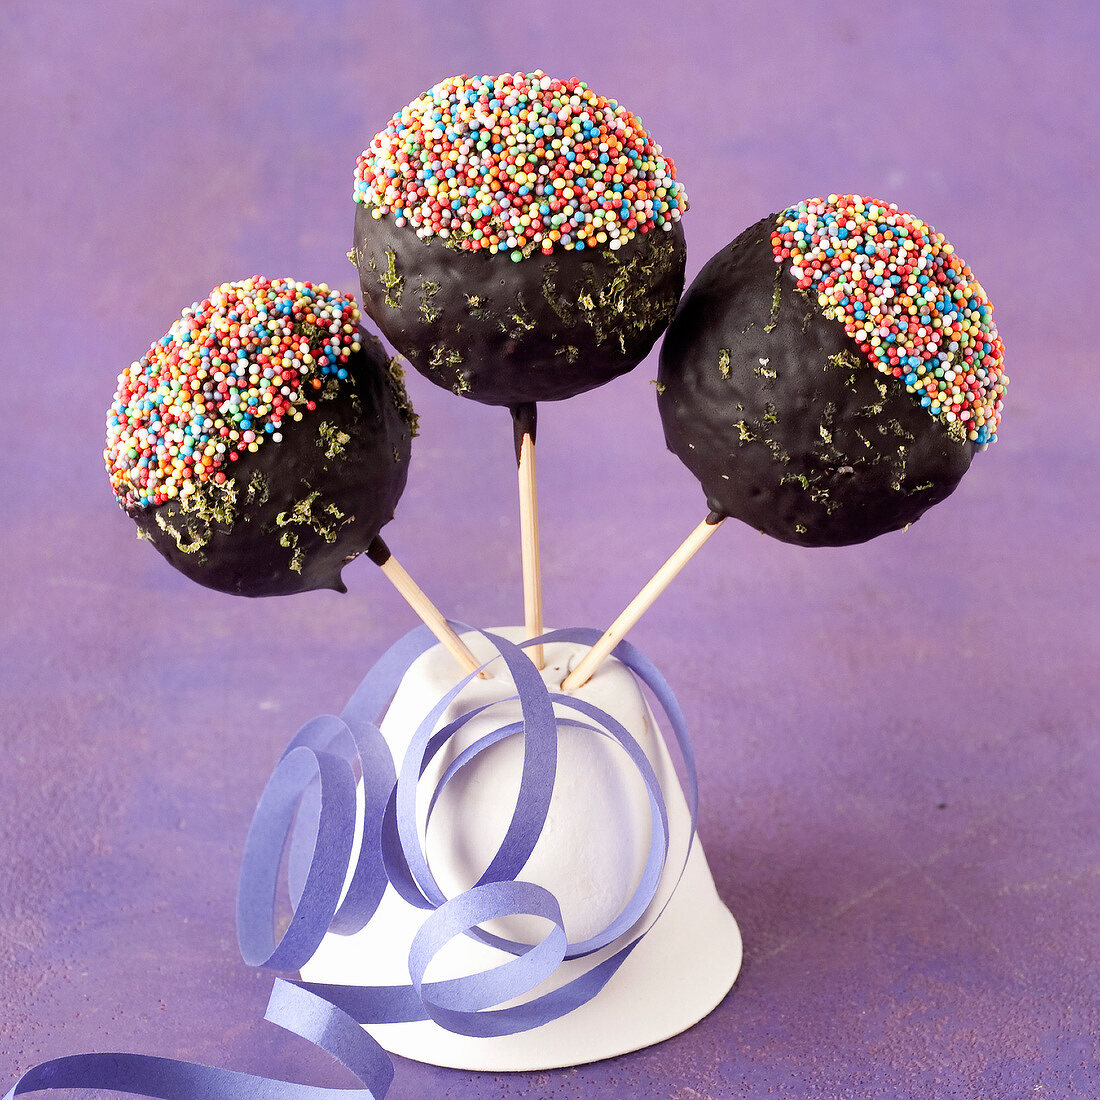 Toffee lollipops coated in chocolate and multicolored sugar